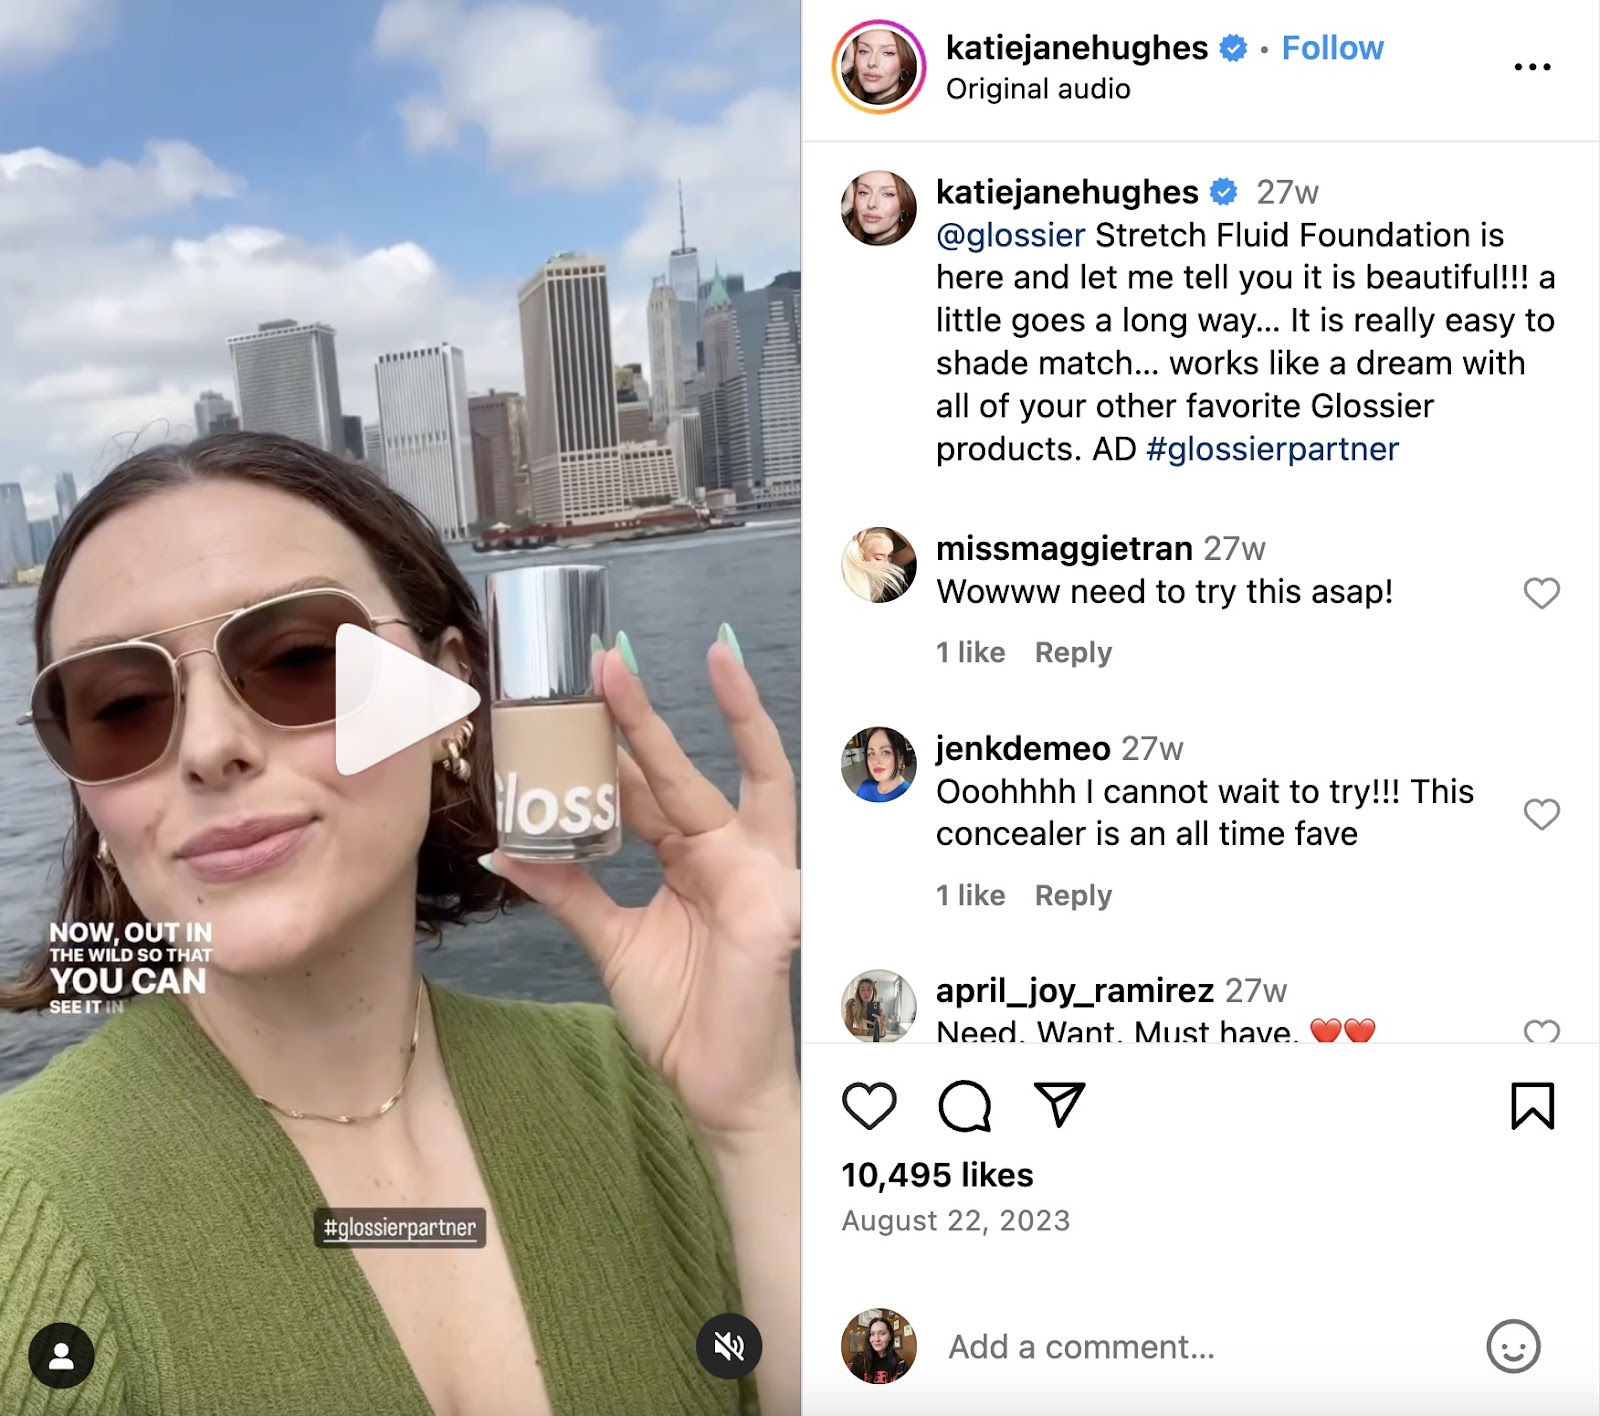 @katiejanehughes video post on Instagram, promoting Glossier's foundation